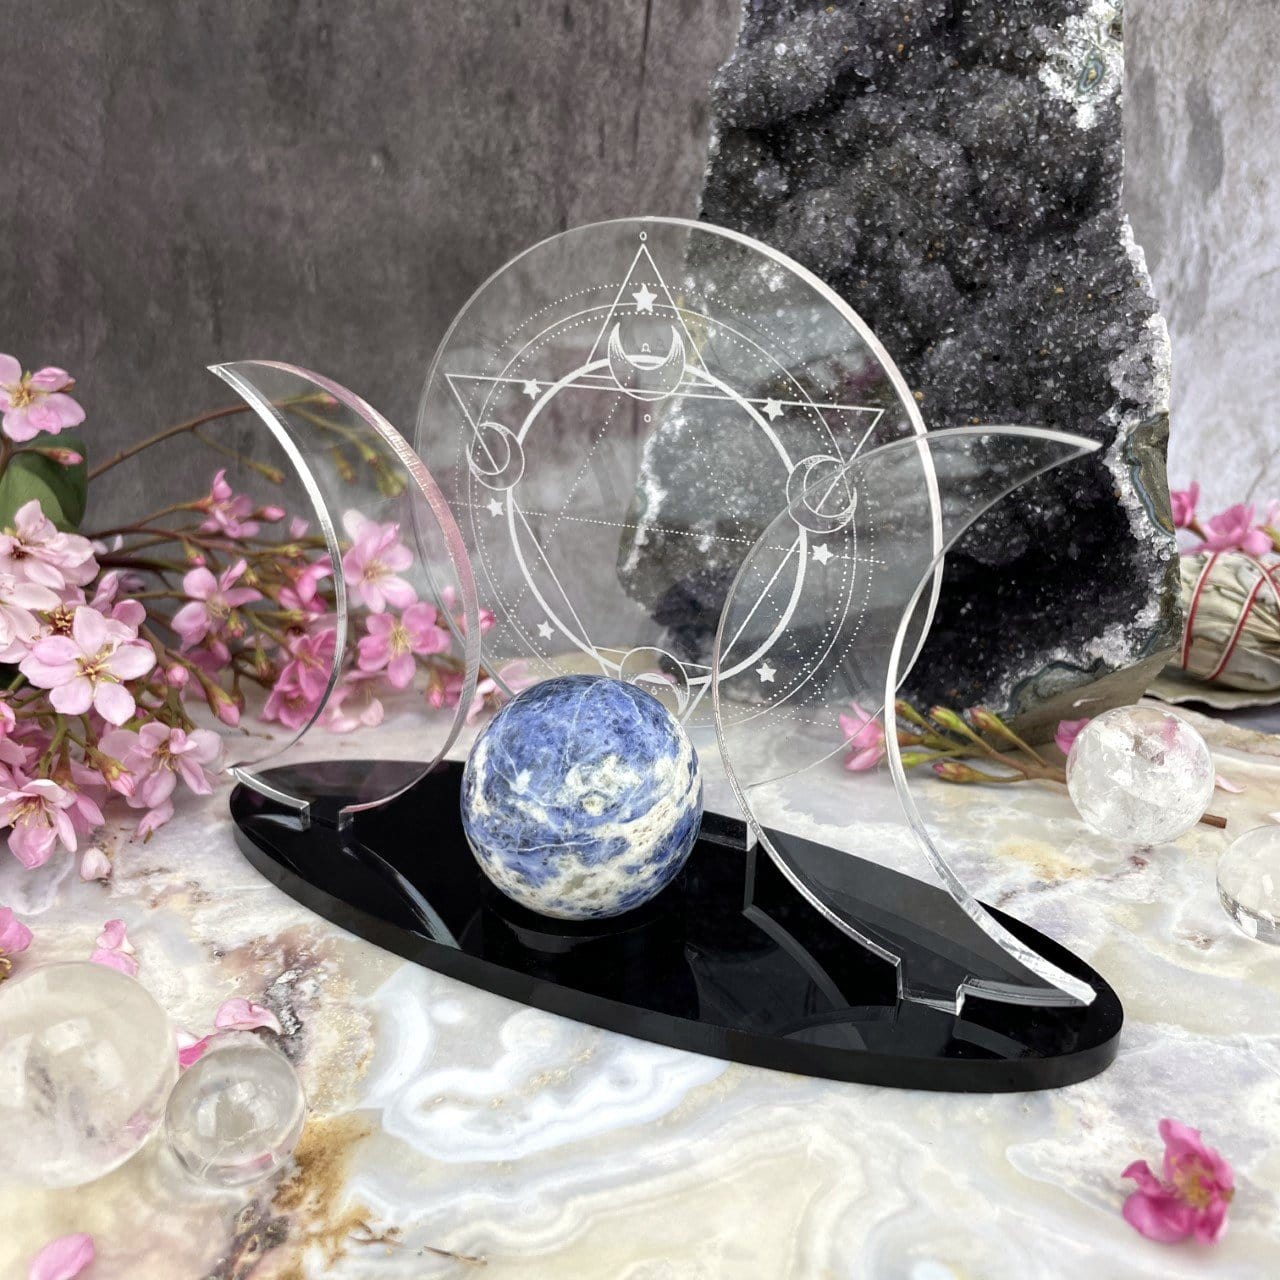 Close up of an Acrylic Sphere Holder Sacred Geometry - 6 Pointed Star holding a sphere in an alter that consists of flowers and crystals.